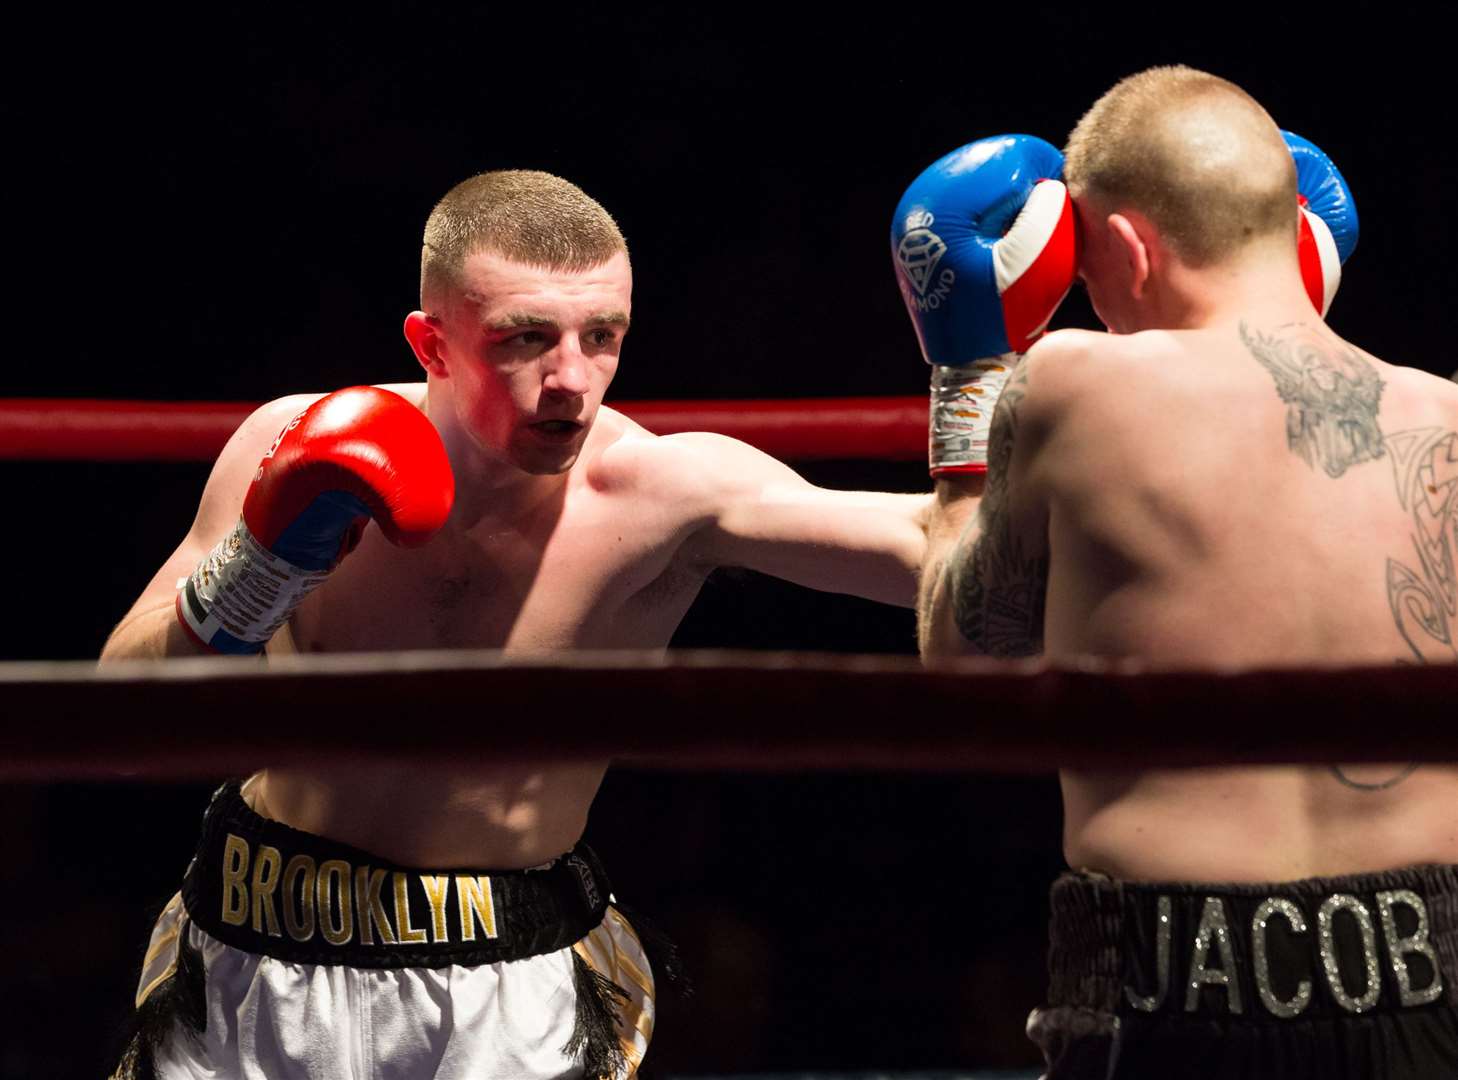 Rainham boxer Brooklyn Tilley hoping for his big break on Saturday in the BOXXER series Picture: Countrywide Photographic